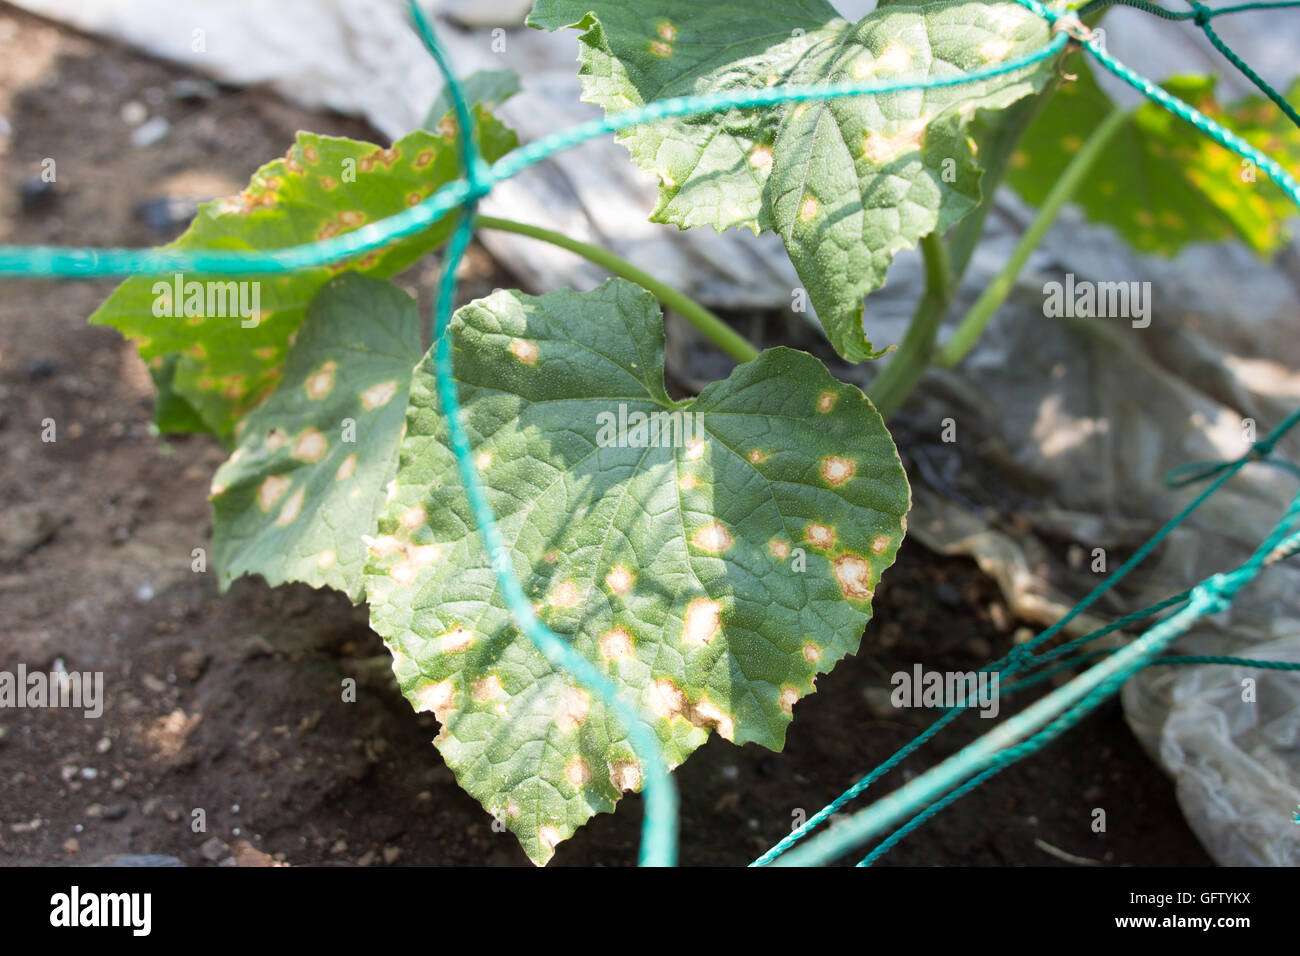 Downy mildew on the leaf of cucumbers Stock Photo